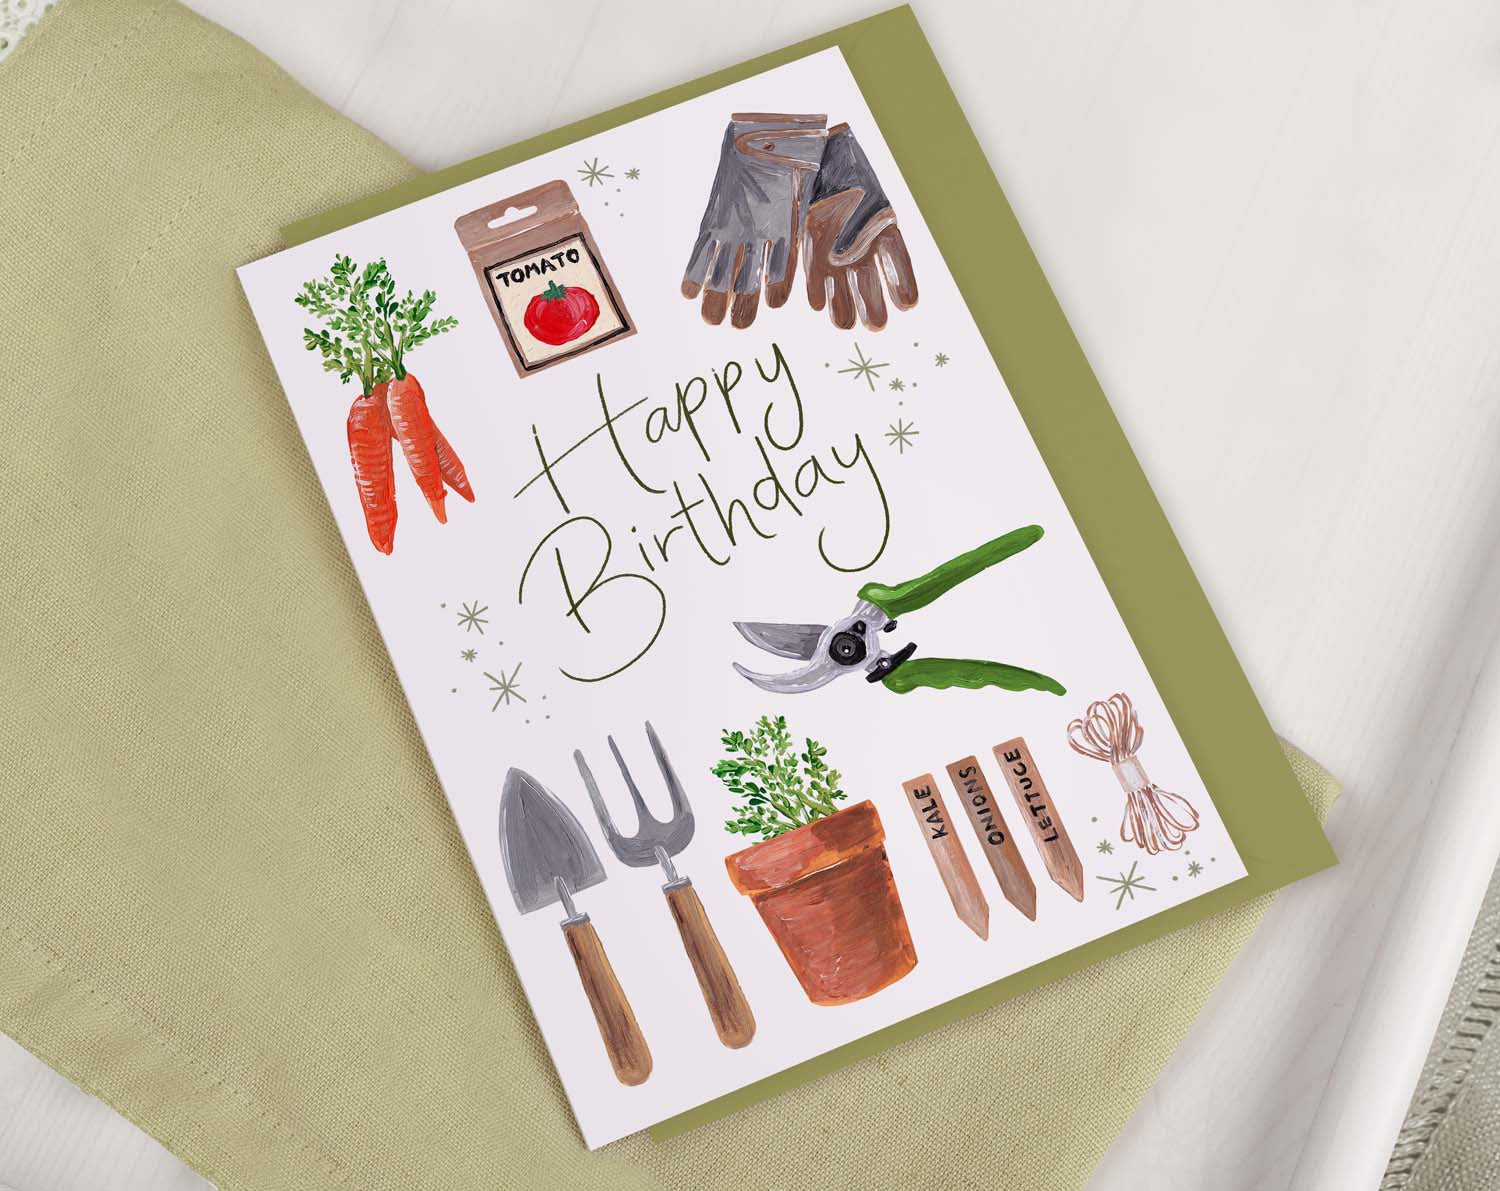 Vegetable Patch Birthday Card